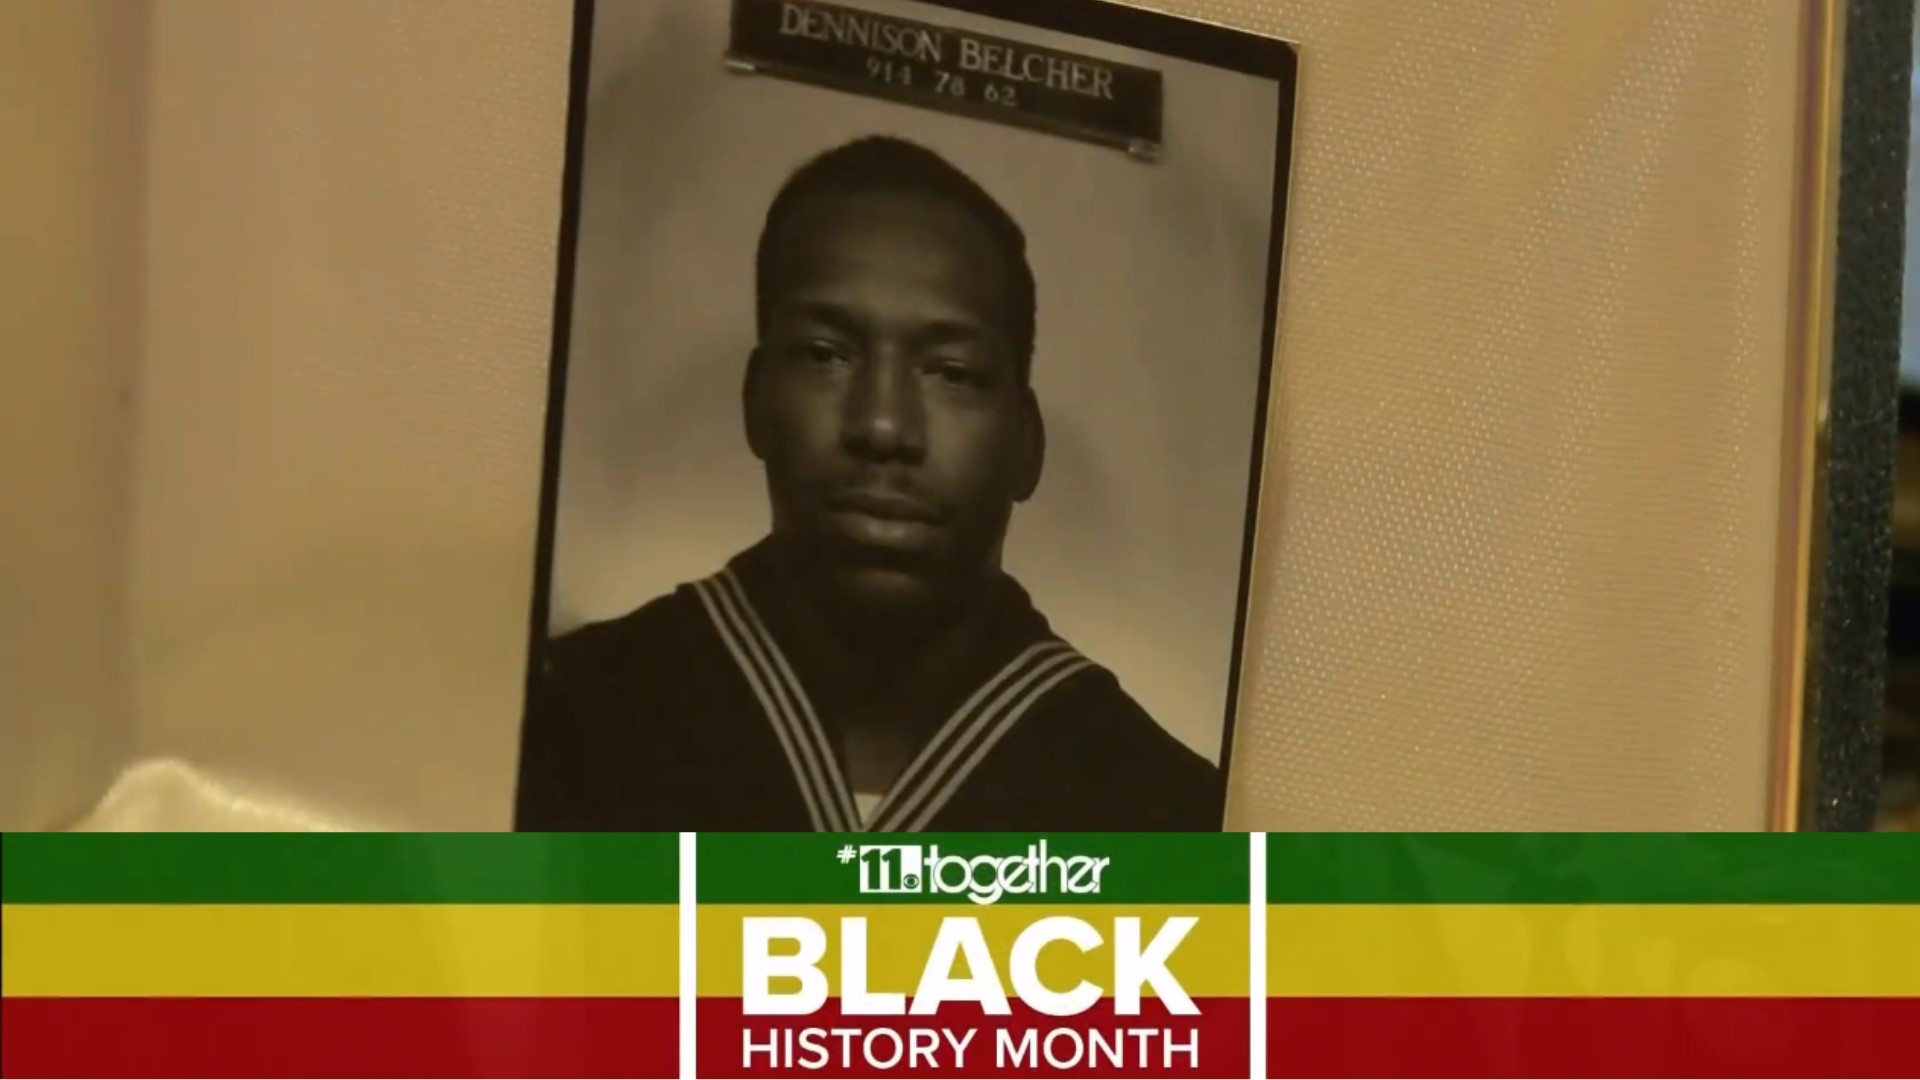 Dennison Belcher was one of the few African Americans in the military during his time as a sailor.